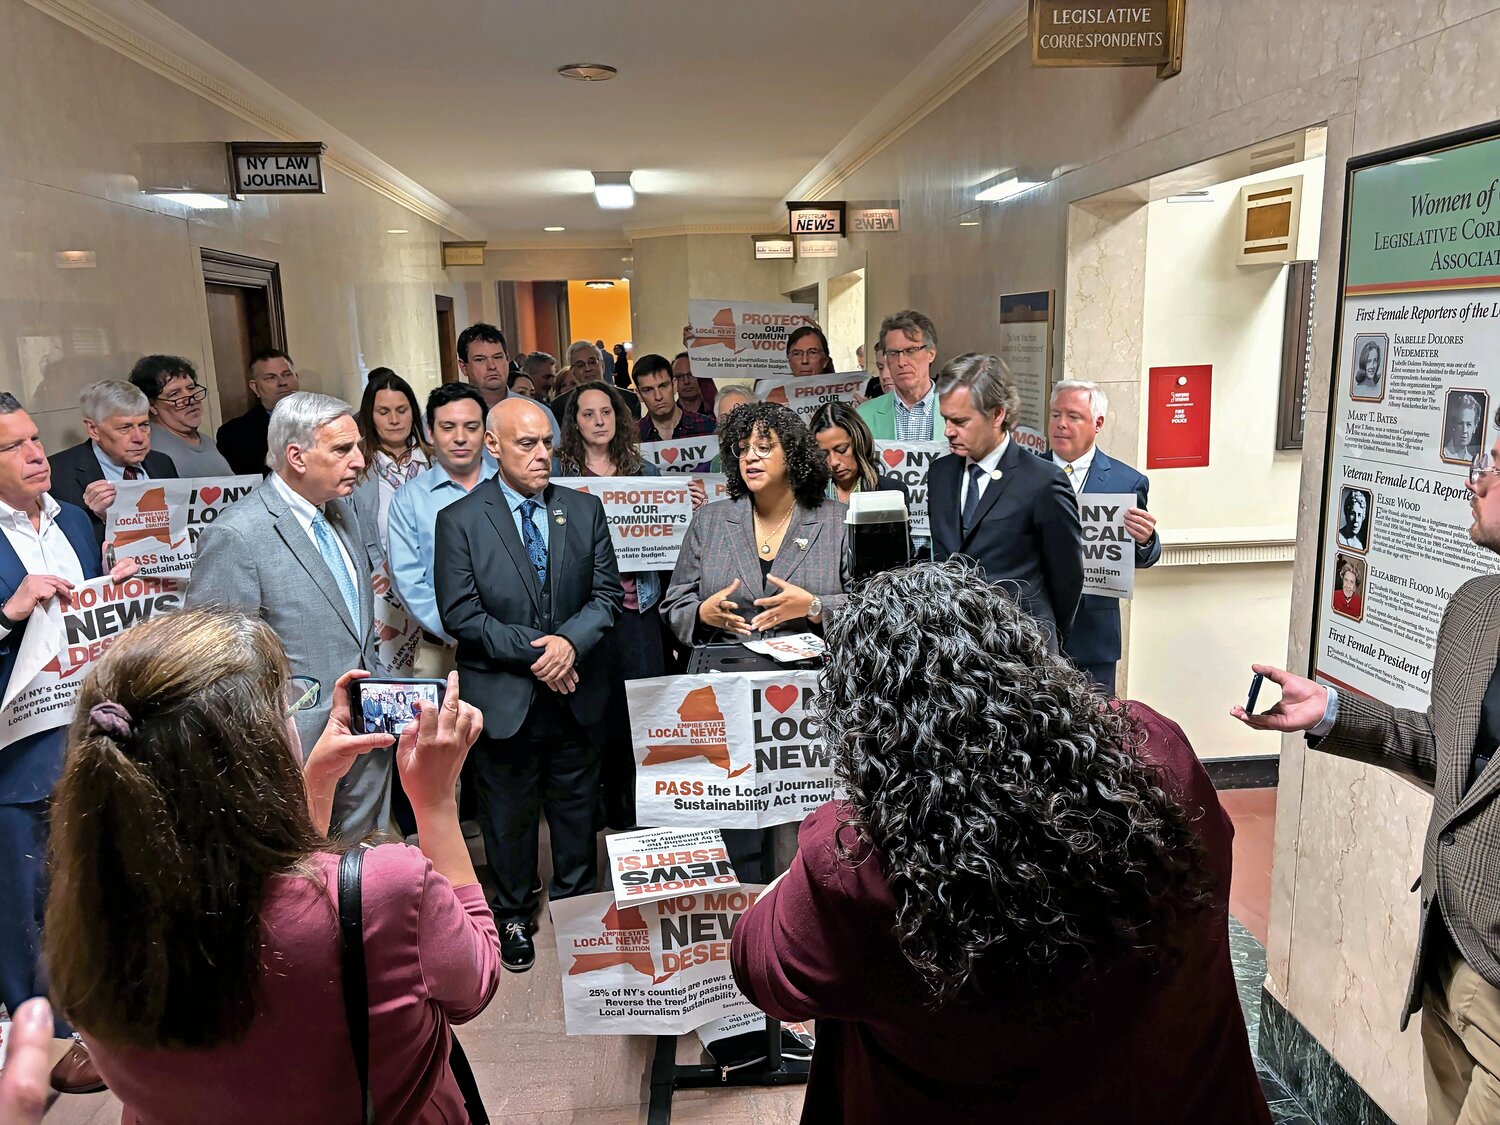 Assemblywoman Michaelle Solages of Long Island joins lawmakers and supporters like Assemblyman David Weprin, at left, and state Sen. Brad Hoylman-Sigal, at right, to call on her colleagues to support the Local Journalism Sustainability Act. The measure — currently included in the senate’s One House budget — would provide tax credits to local news outlets, so they can keep local reporters on the ground and covering communities.